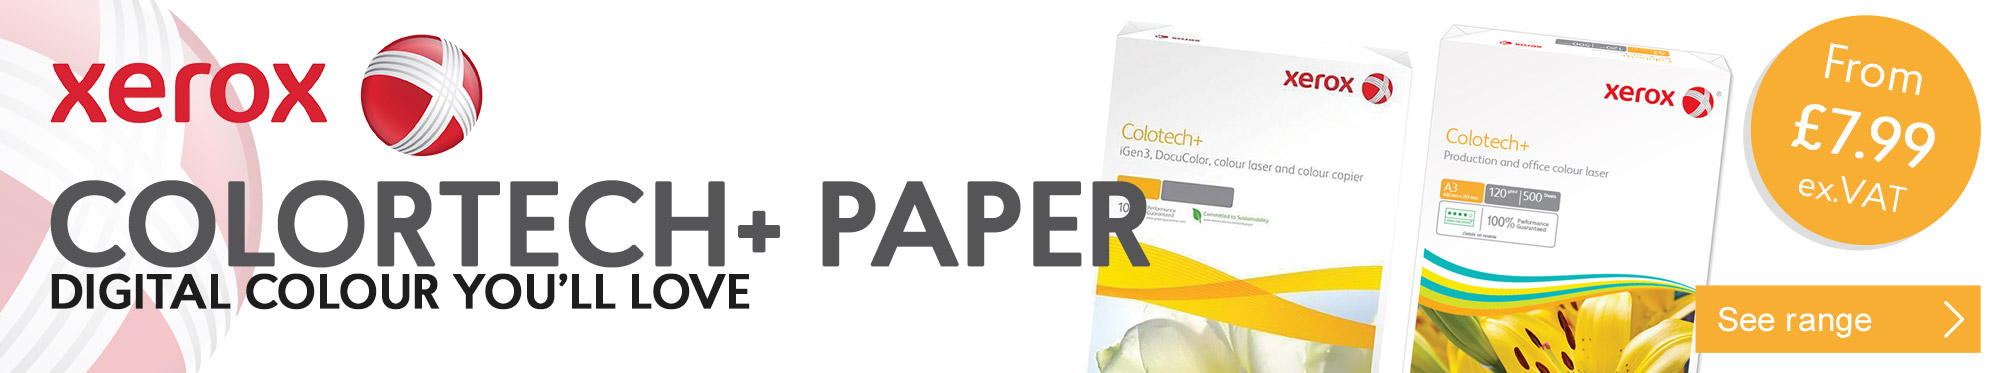 Xerox Colortech + for Digital Colour Printing